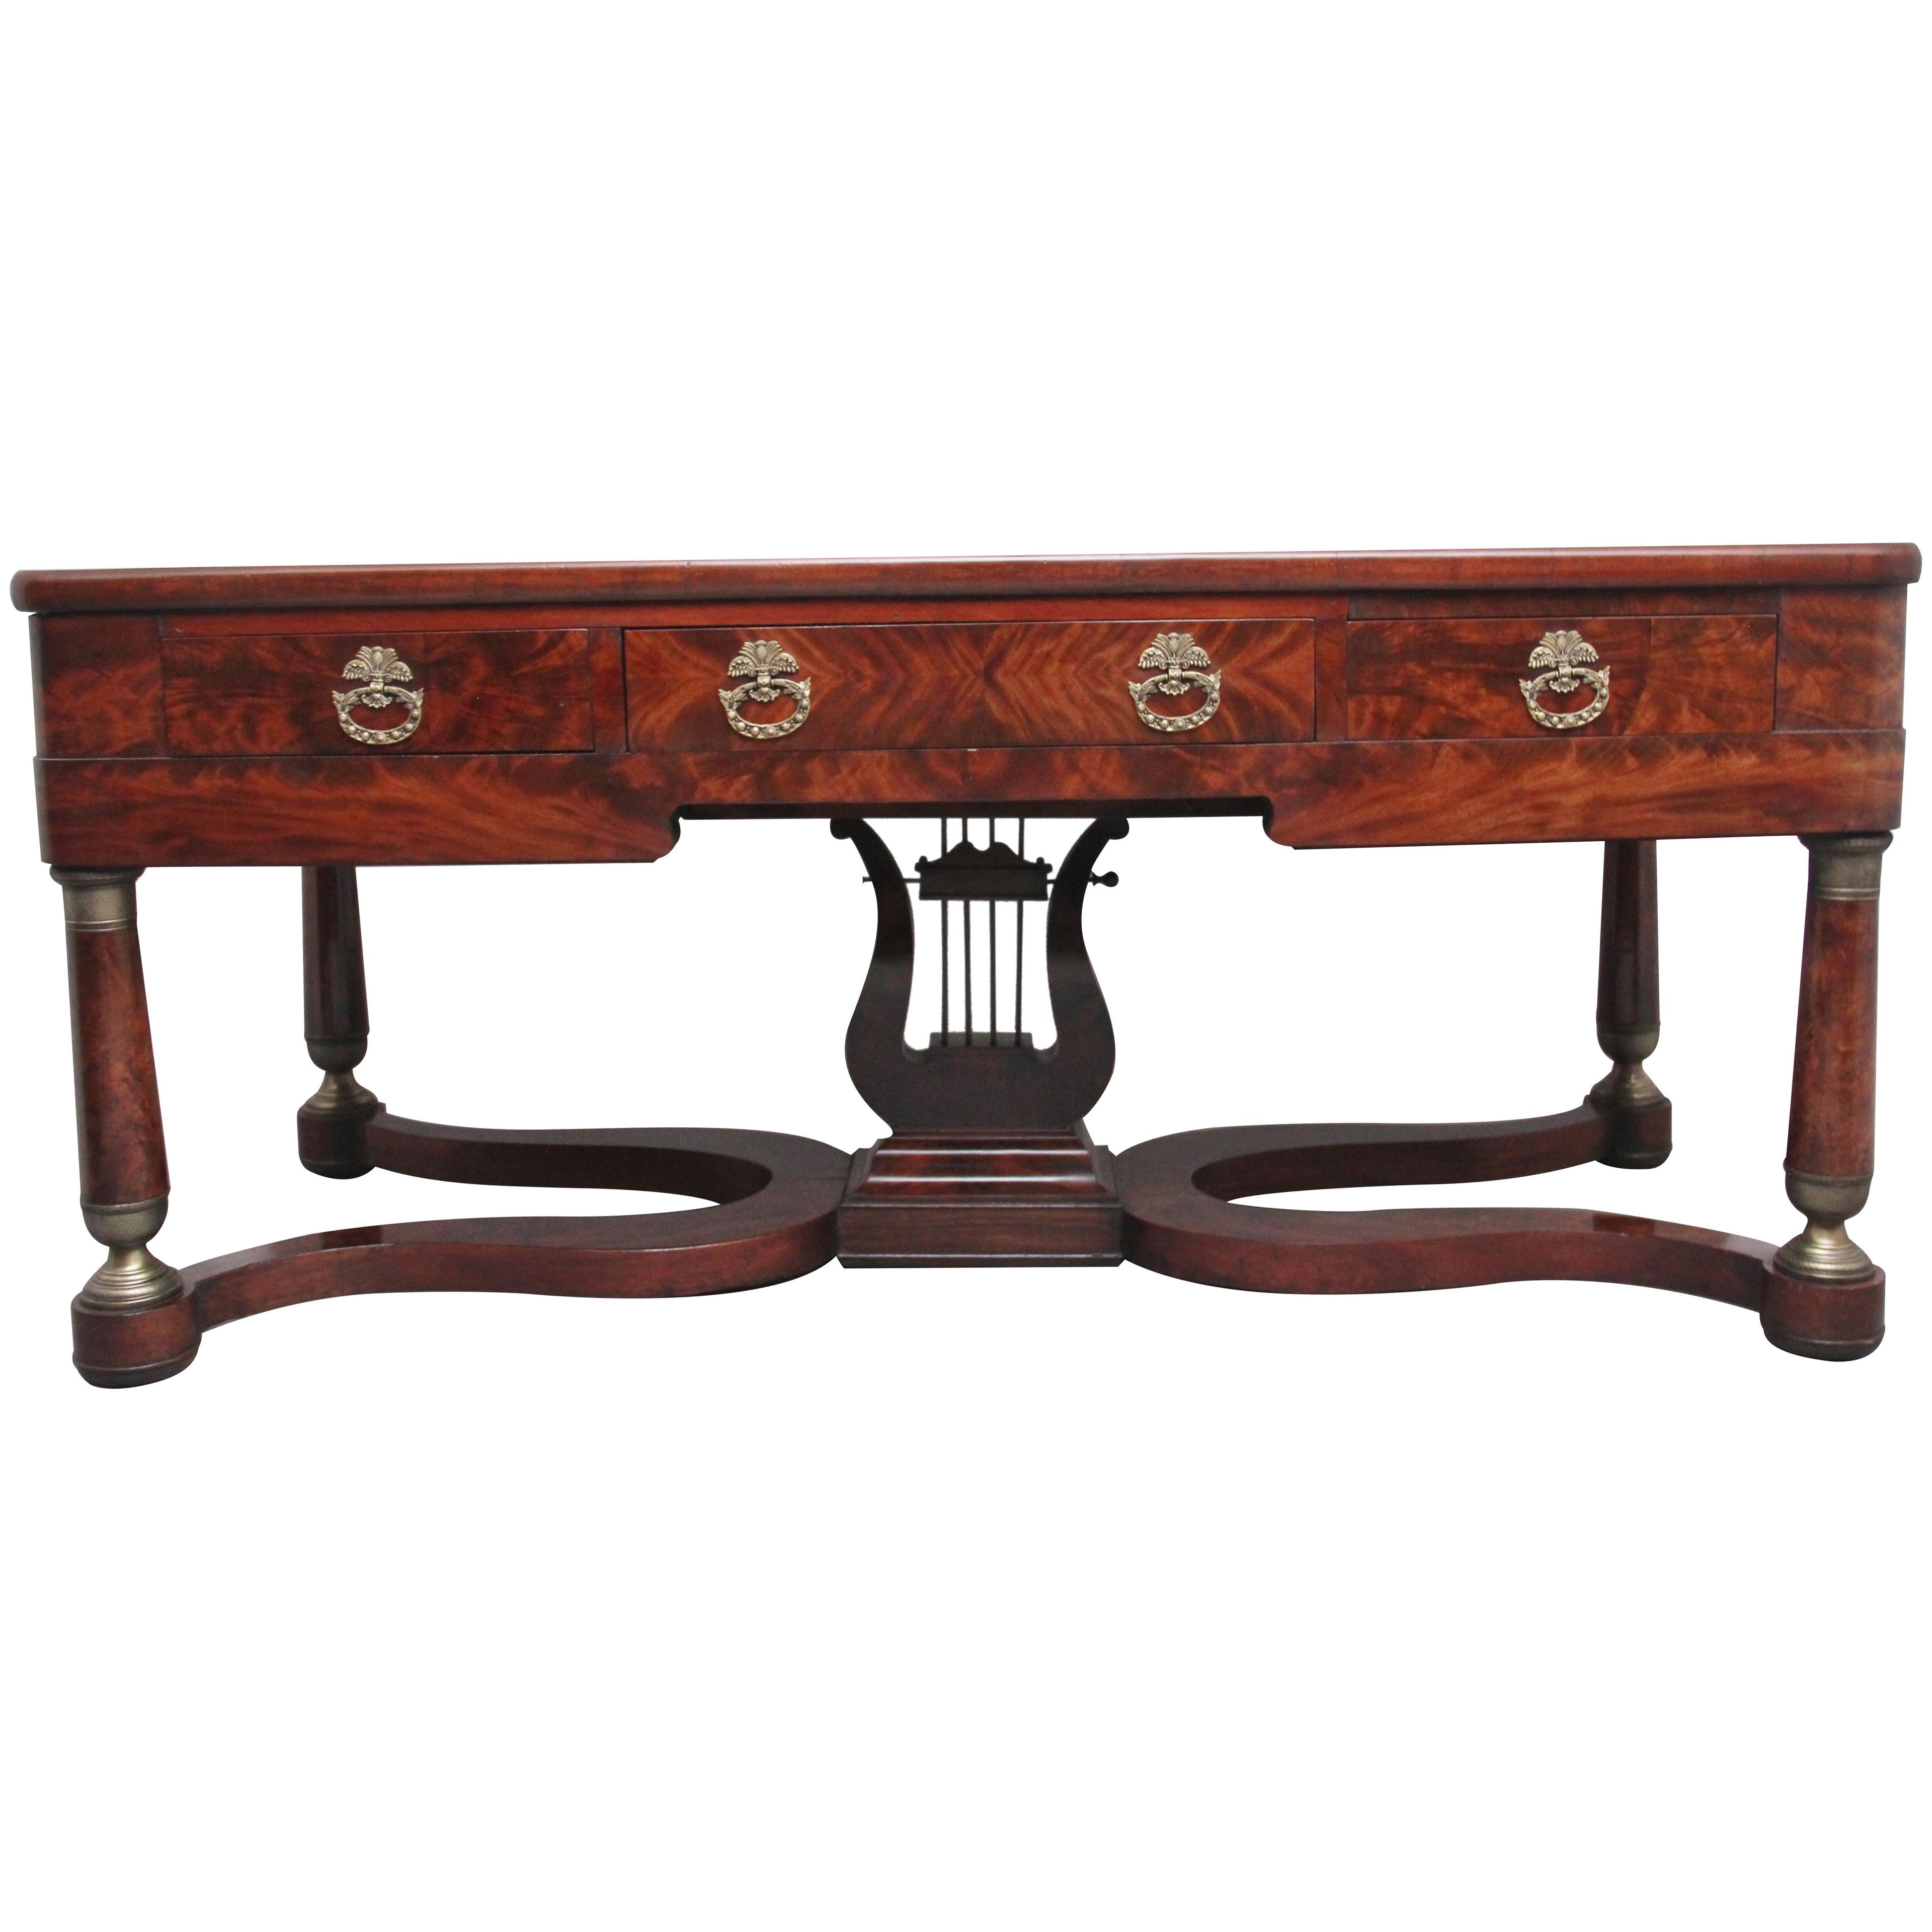 A large and impressive French 19th Century antique mahogany console table